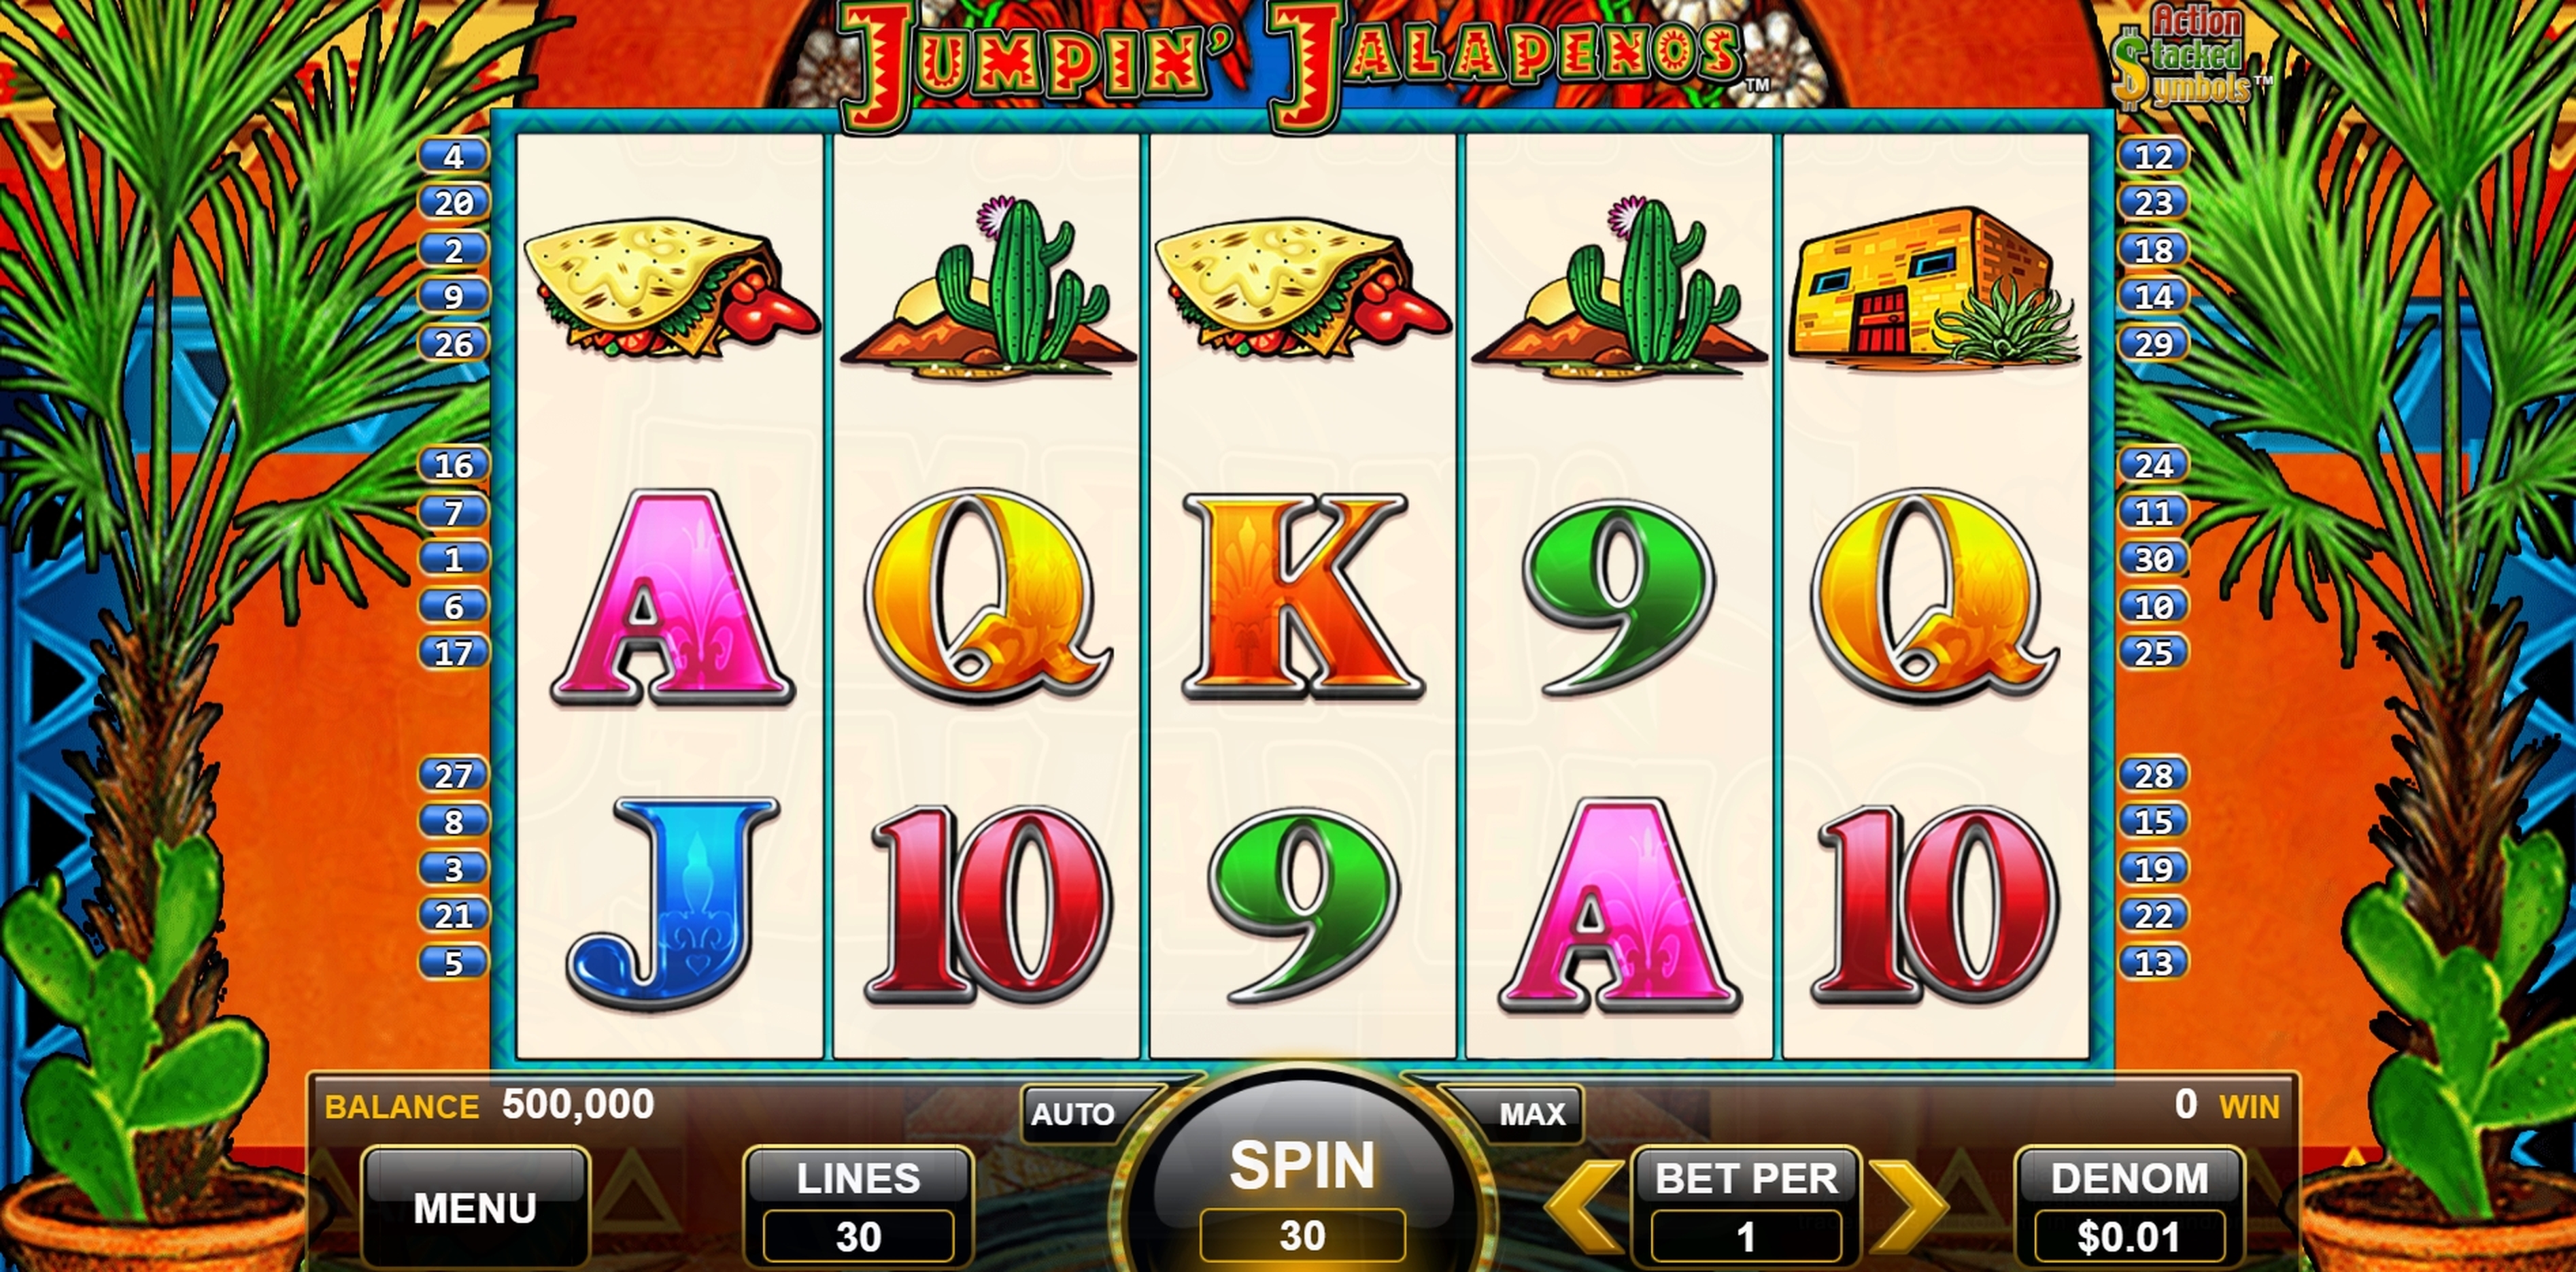 Reels in Jumpin Jalapenos Slot Game by WMS